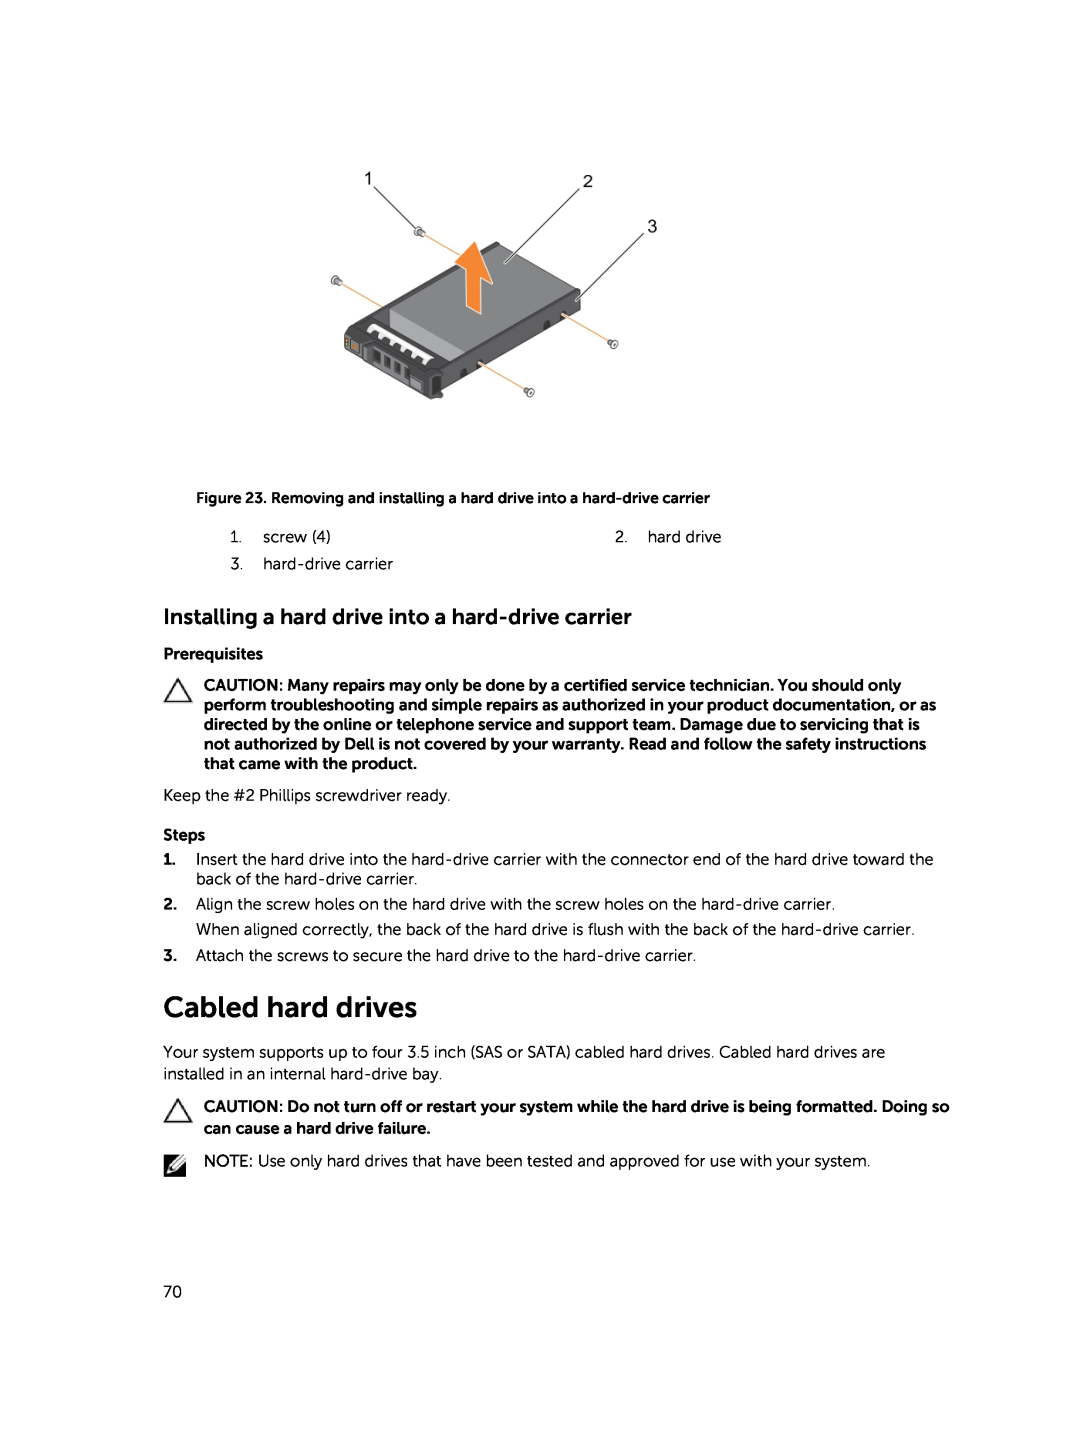 Dell E30S owner manual Cabled hard drives, Installing a hard drive into a hard-drive carrier 